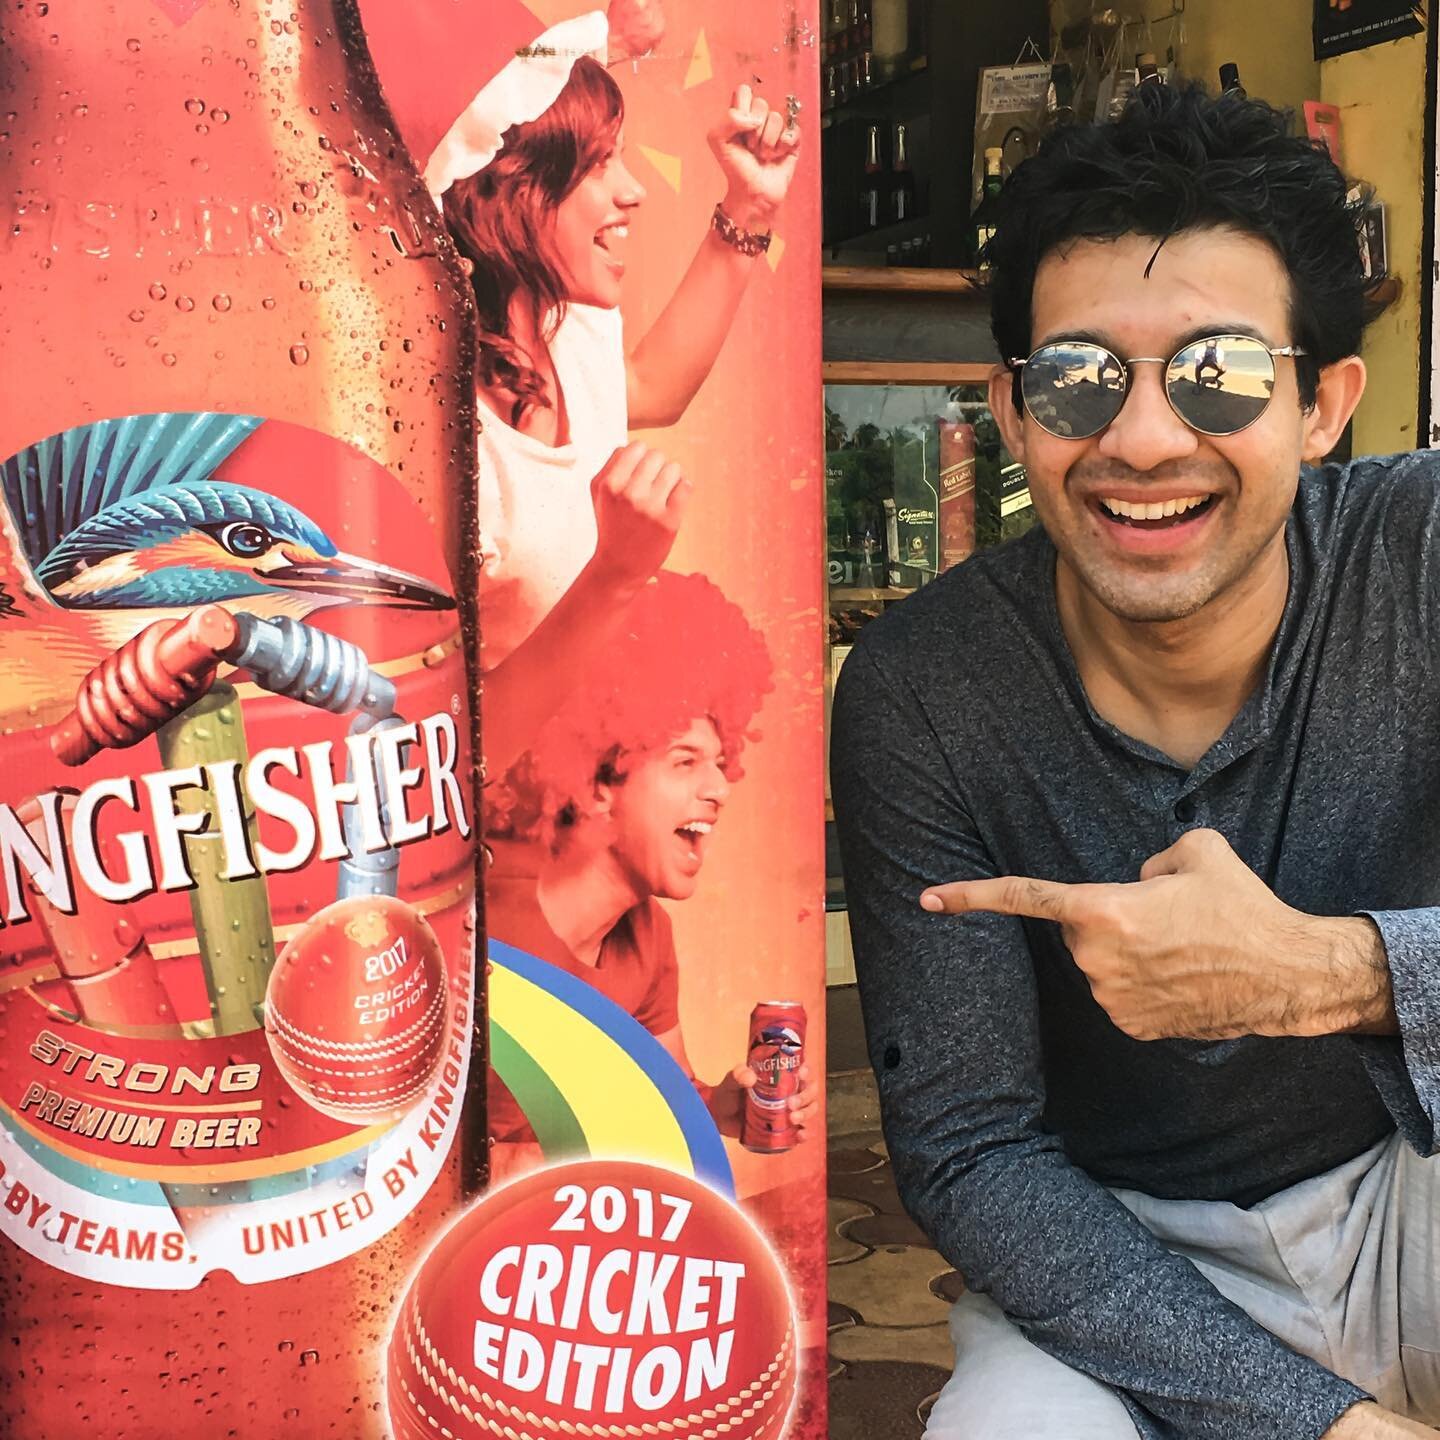 Familiar face spotted in Goa in the Kingfisher 2017 Cricket Edition campaign ;)
.
Also, hi @sarahharish 👋
.
#Throwback #Model #Actor #Ad #Advertisement #Brand #Campaign #Cricket #Fan #Kingfisher #Beer #Goa